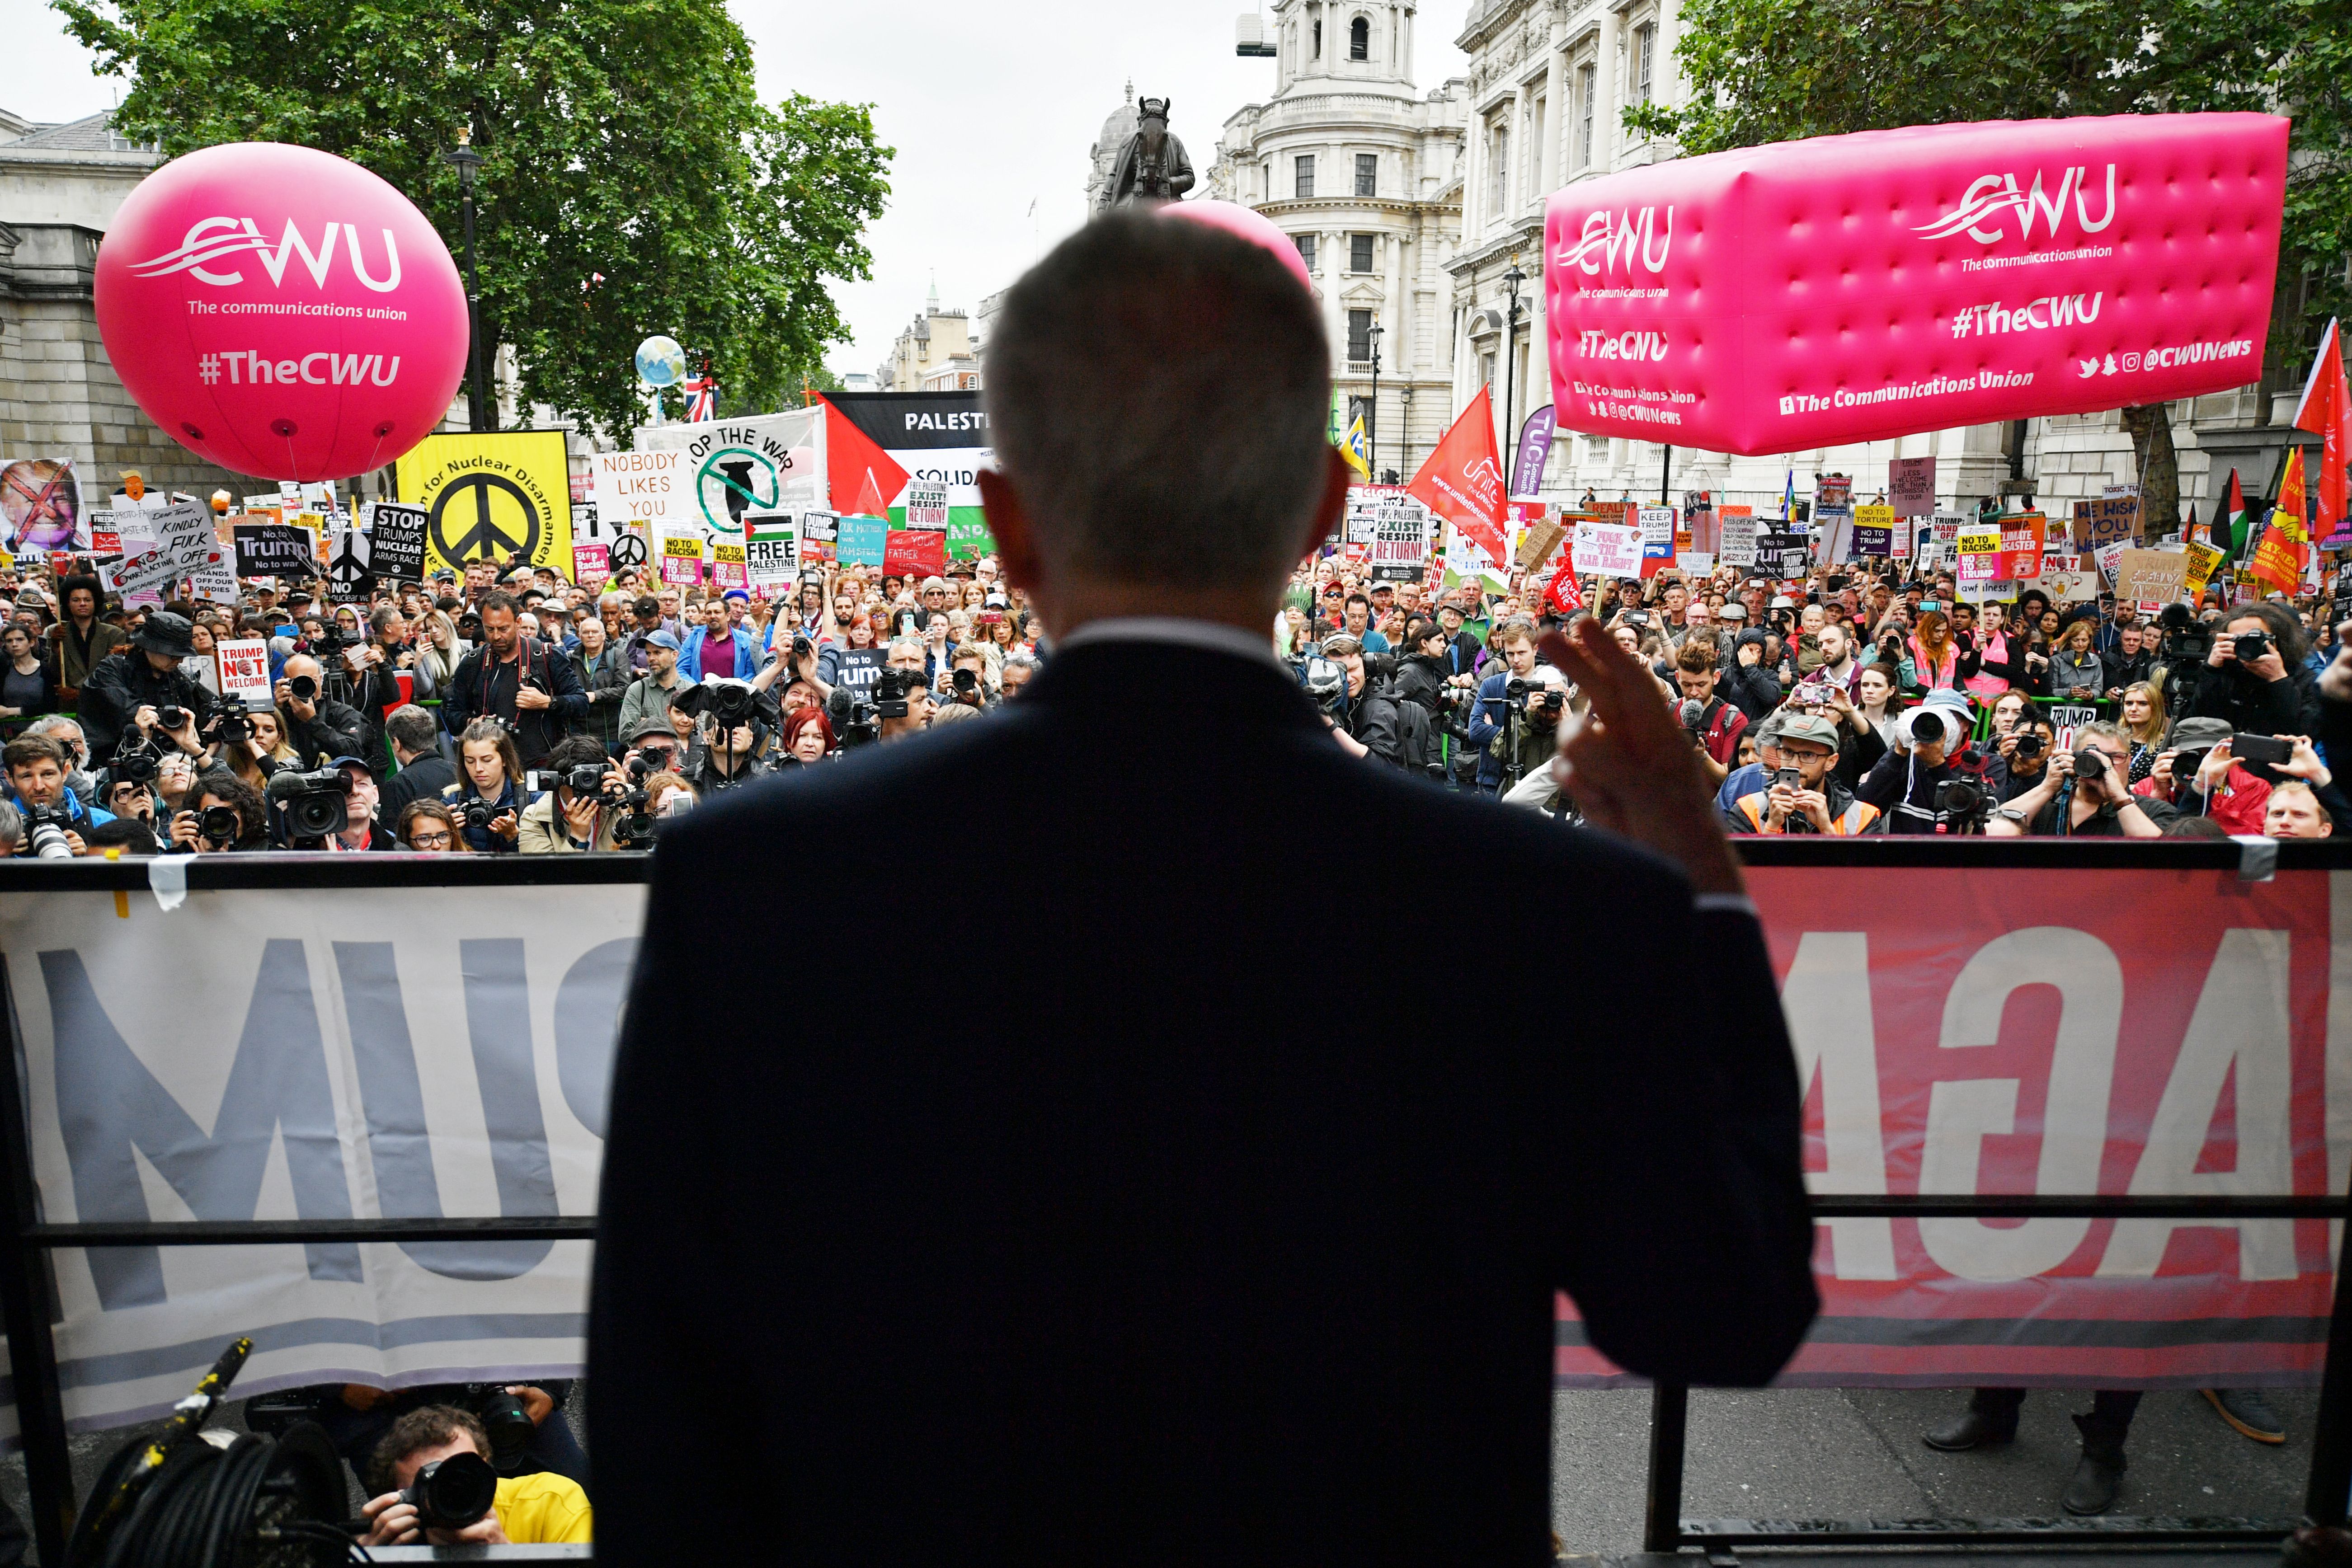 Labour party leader Jeremy Corbyn speaking on stage at an anti-Trump protest in Whitehall, London, on the second day of the state visit to the UK by US President Donald Trump. 